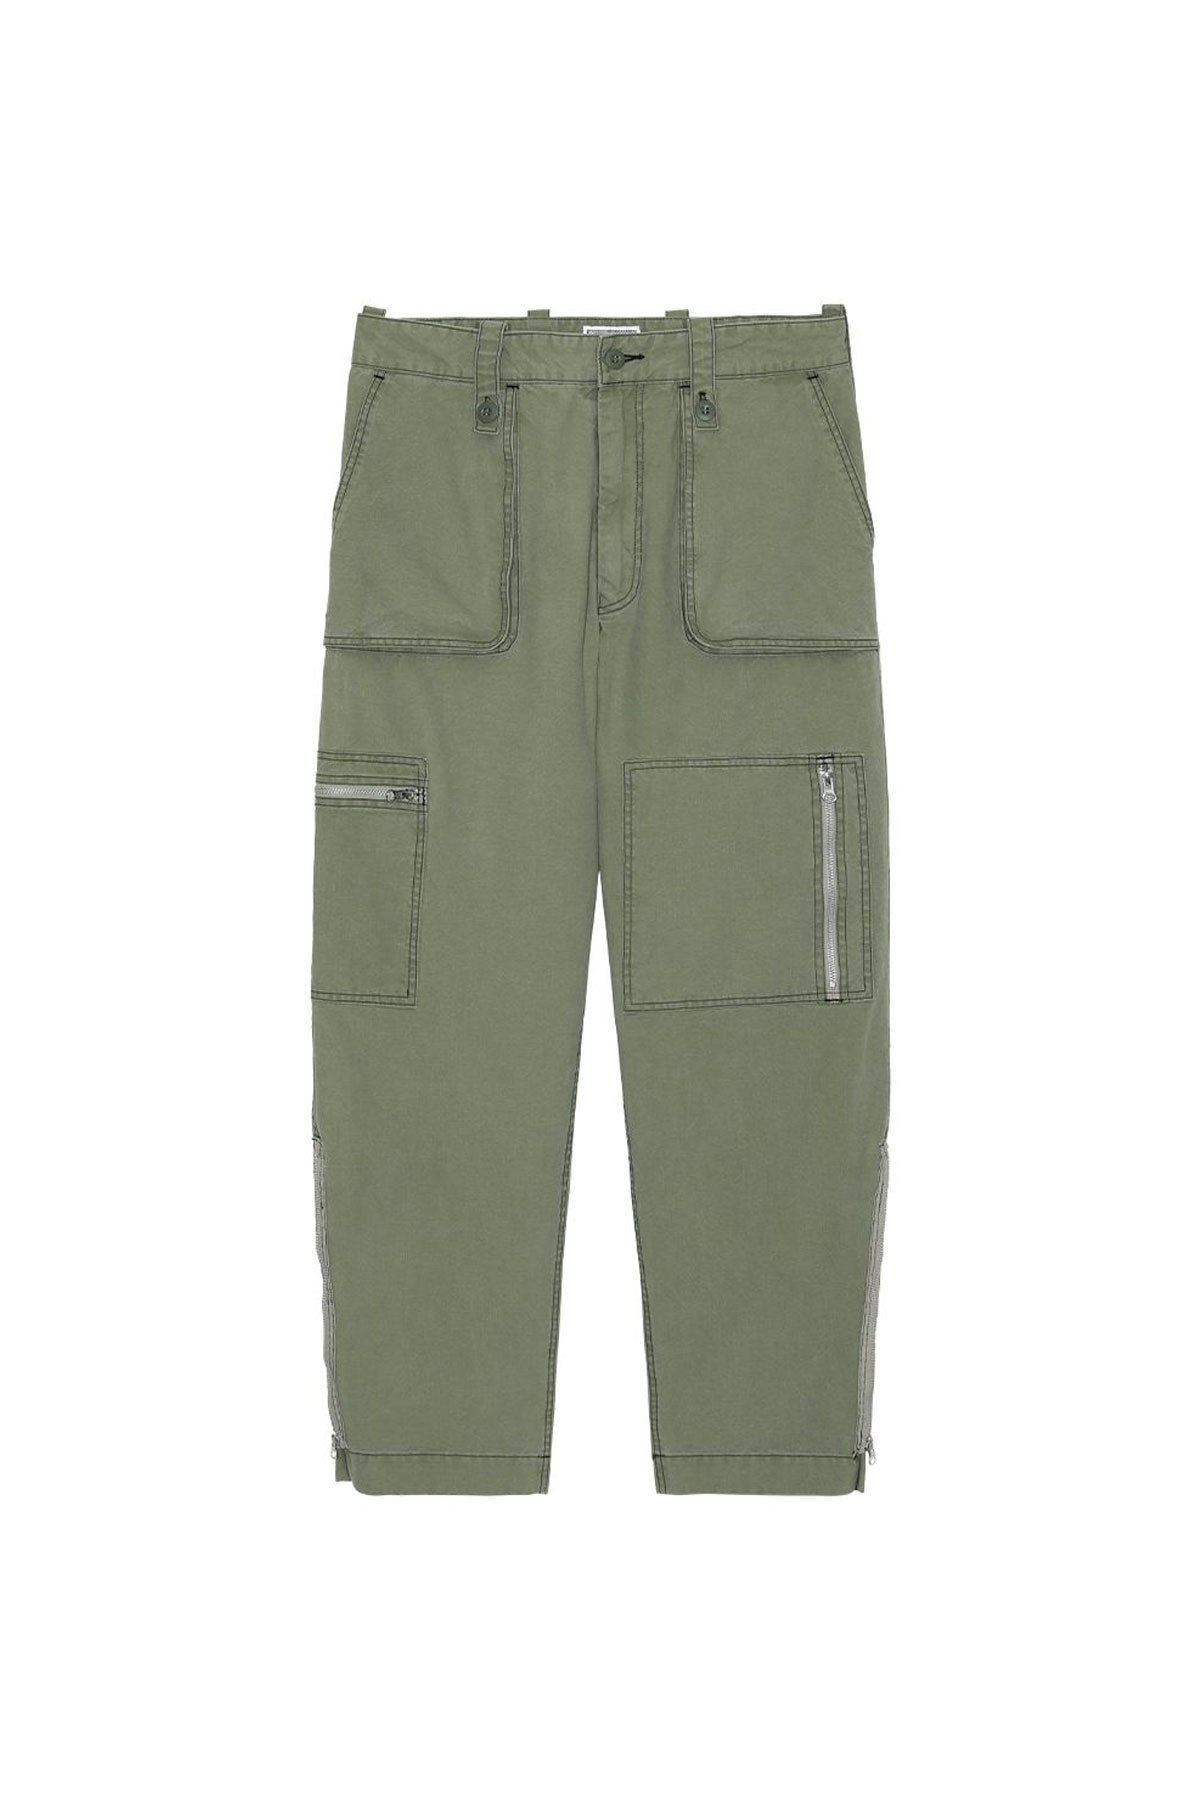 CAV EMPT - YOSSARIAN PANTS #5 GREEN – P.A.M. (Perks And